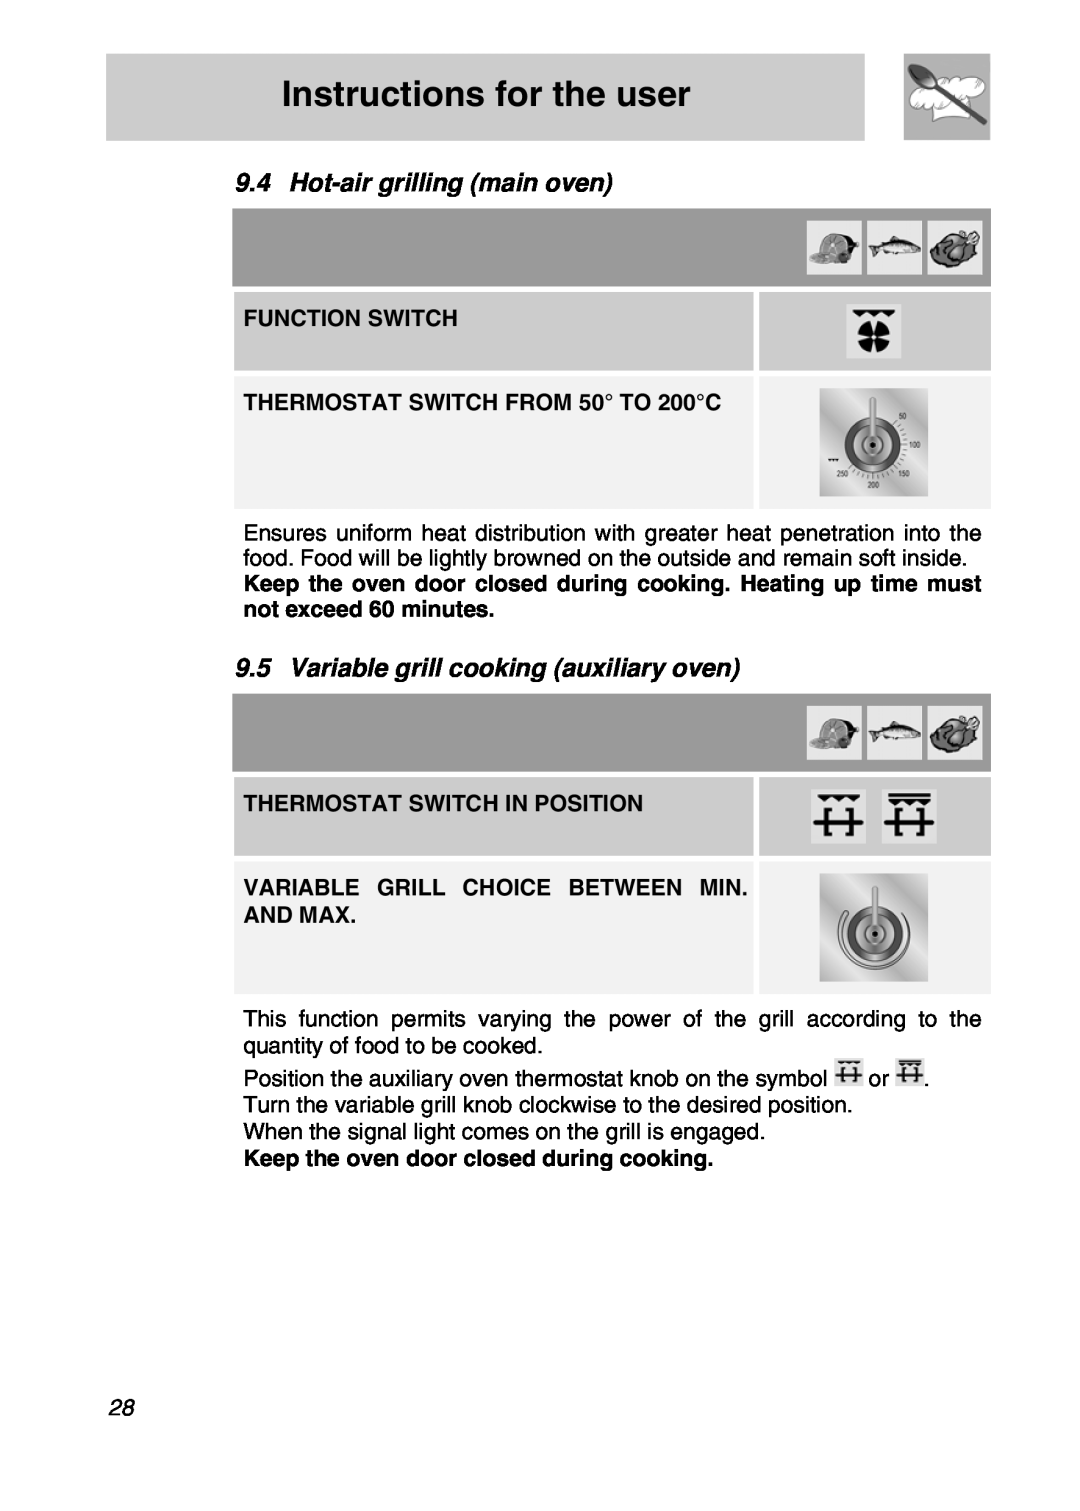 Smeg A3SX manual Hot-airgrilling main oven, Variable grill cooking auxiliary oven, Instructions for the user 